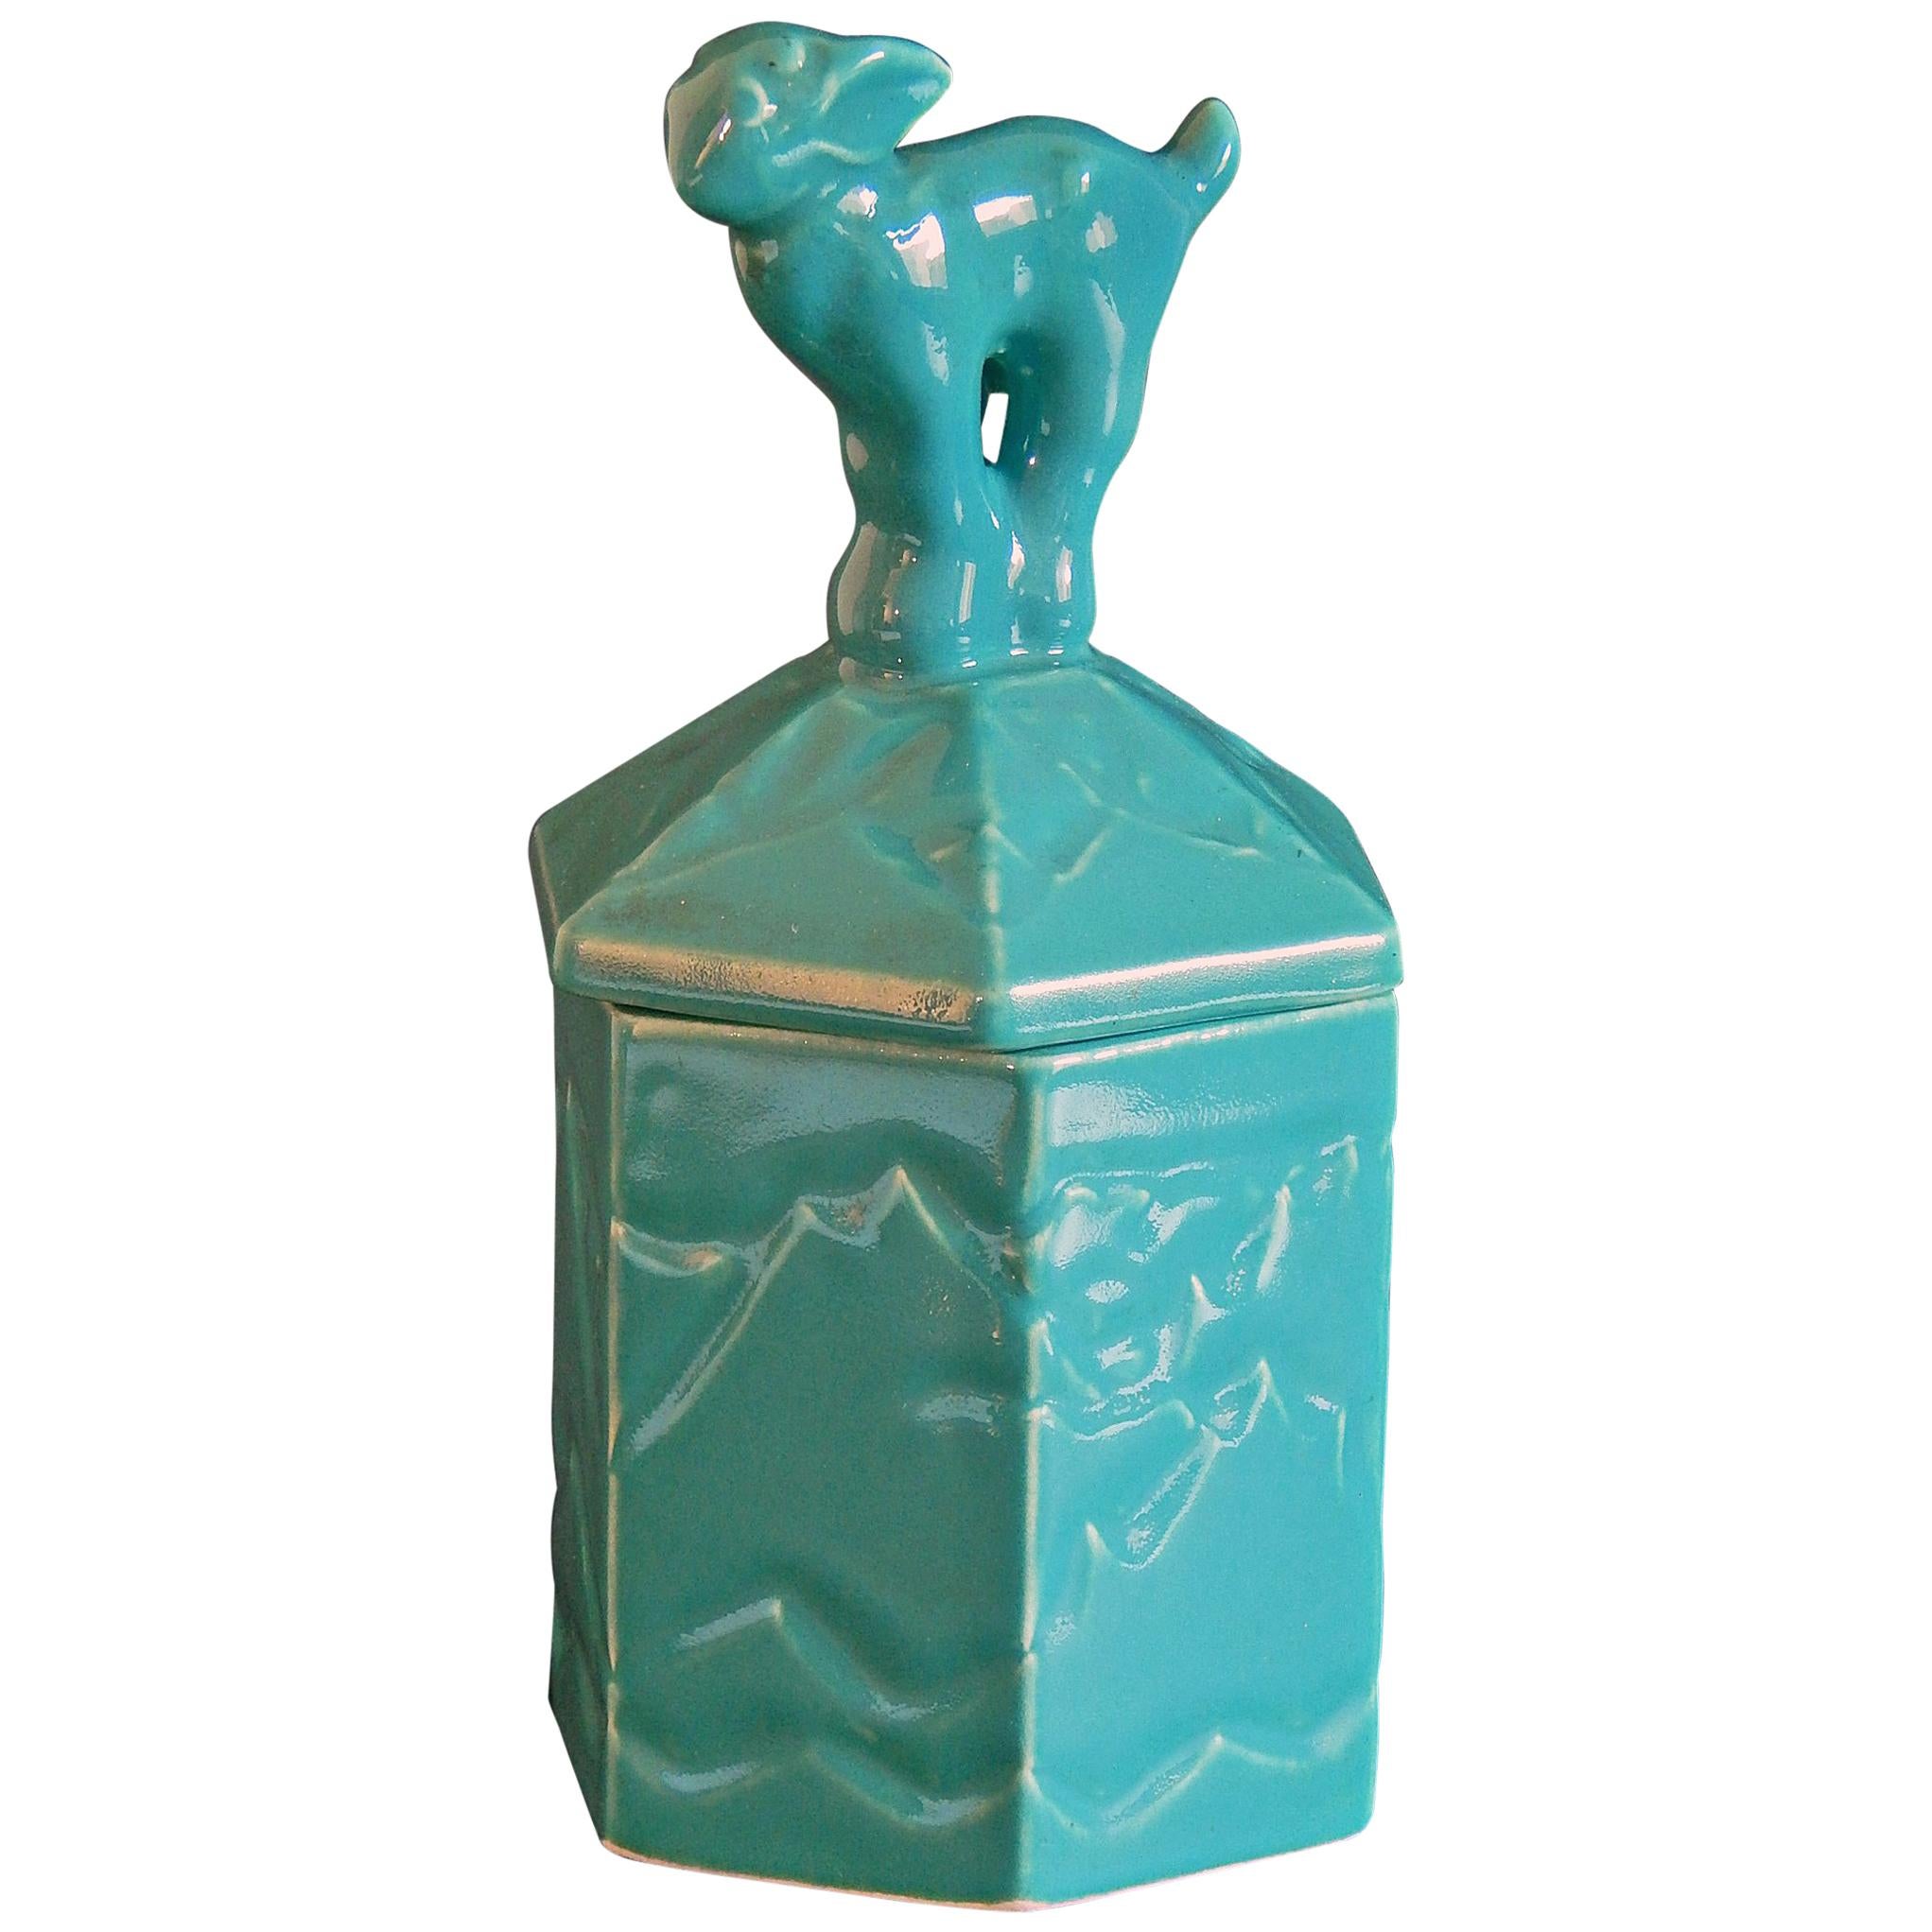 "Mountain Goat Humidor, " Art Deco Lidded Container with Teal-Turquoise Glaze For Sale